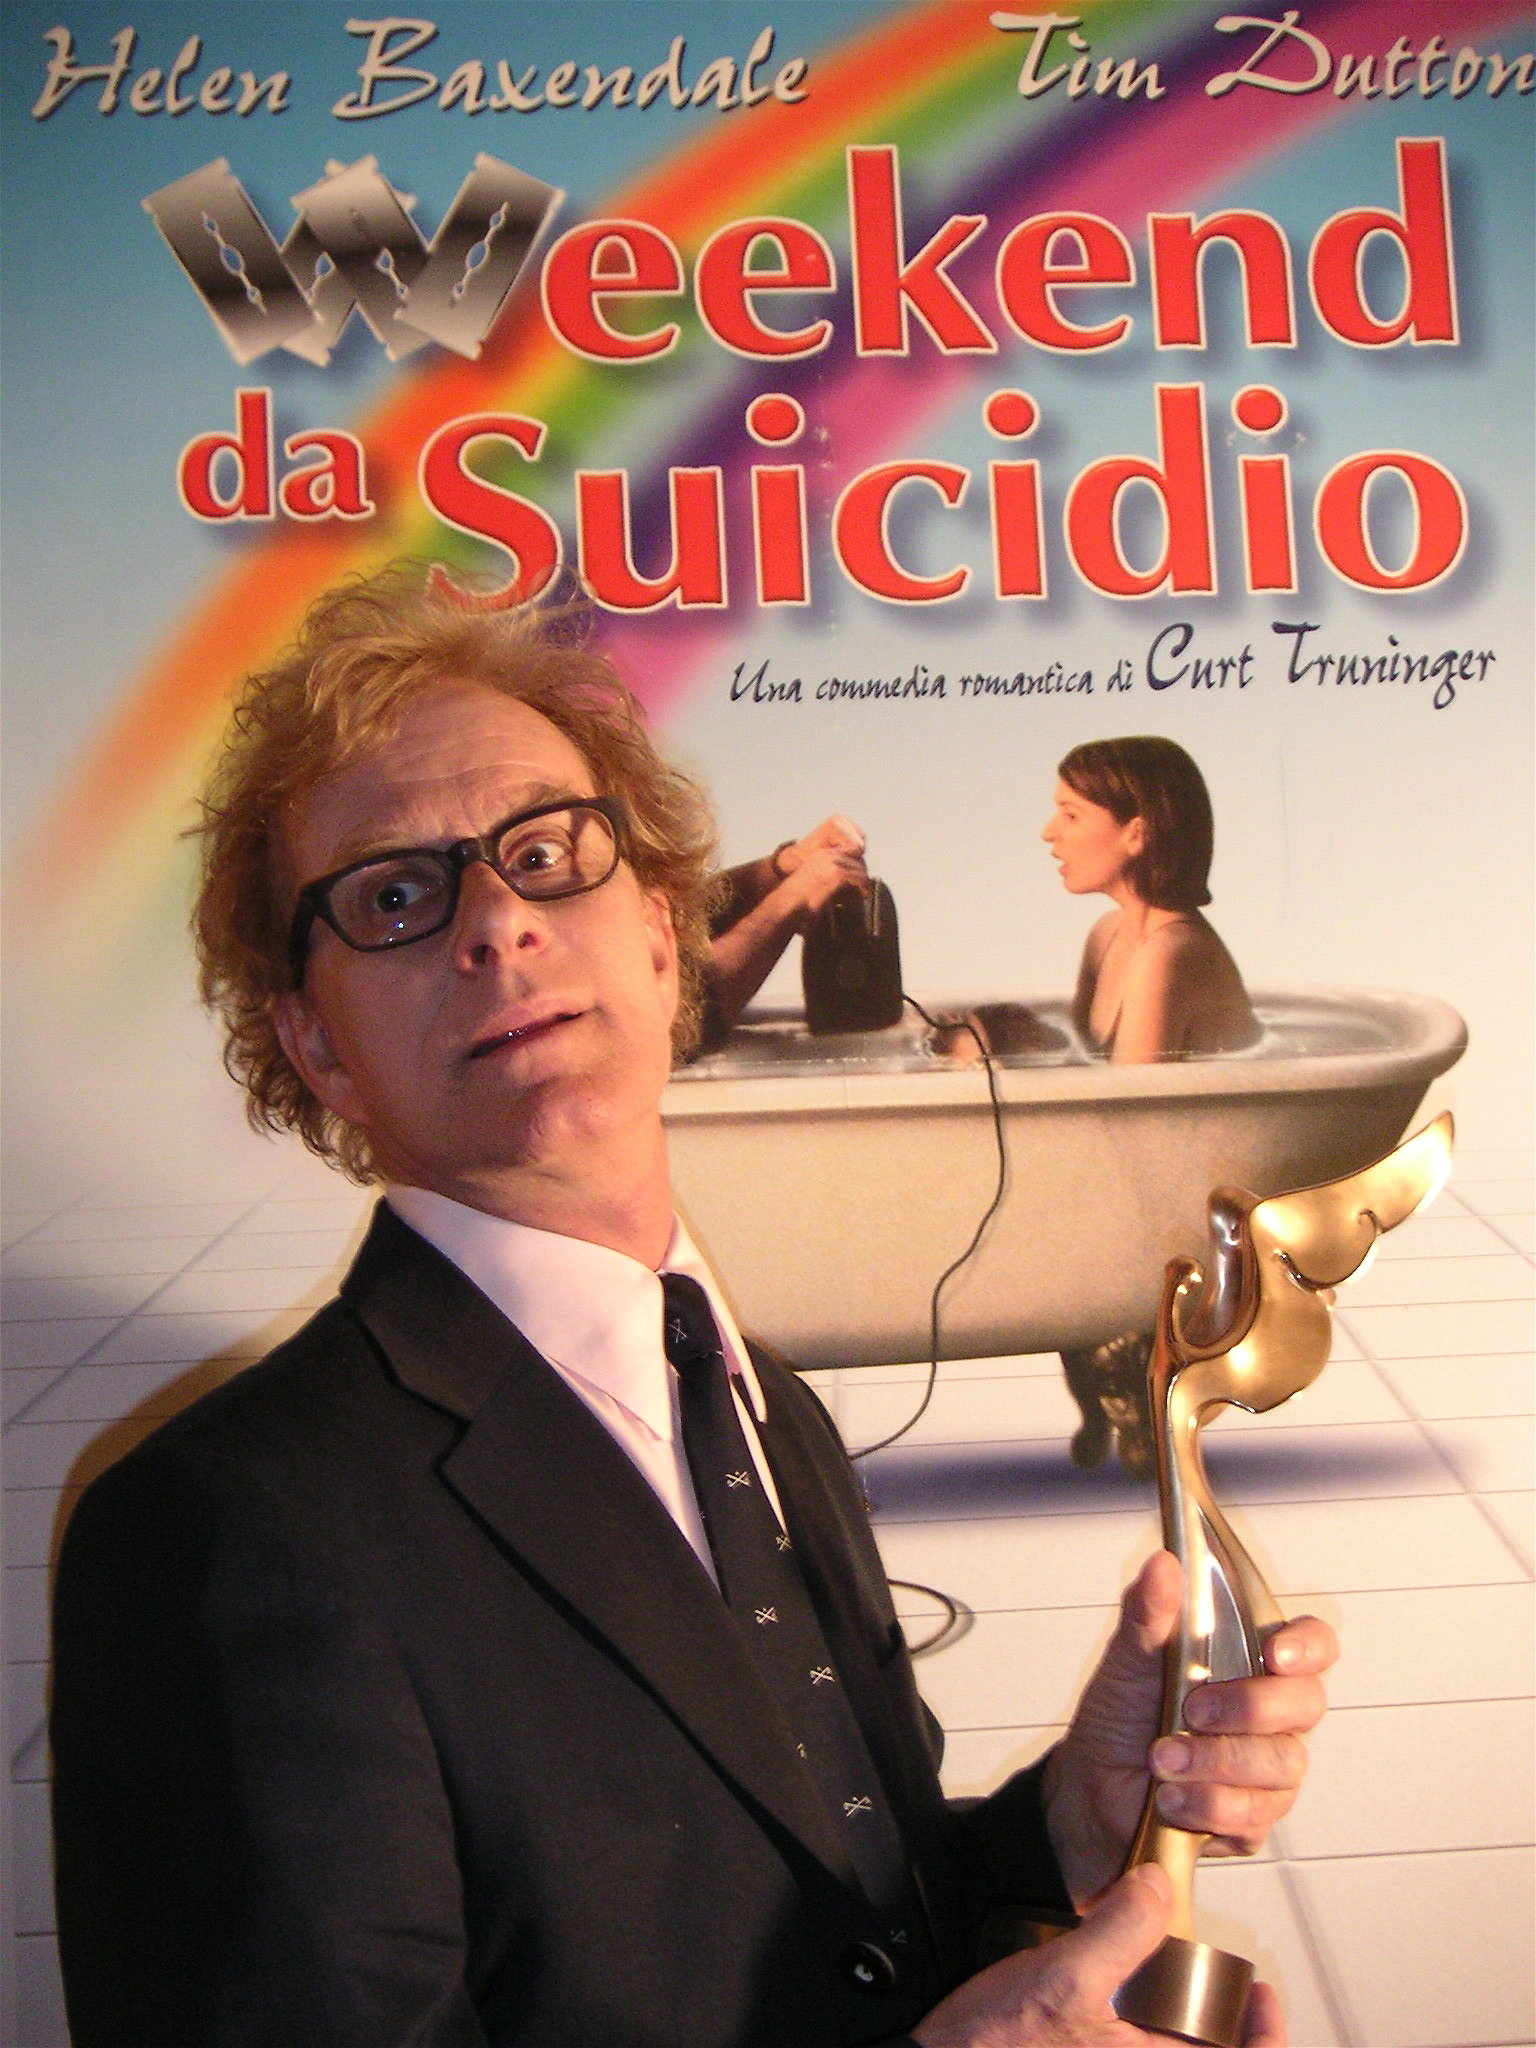 Curt Truninger with Angel Award 2003- Best Picture for Dead By Monday (Weekend da Suicidio)